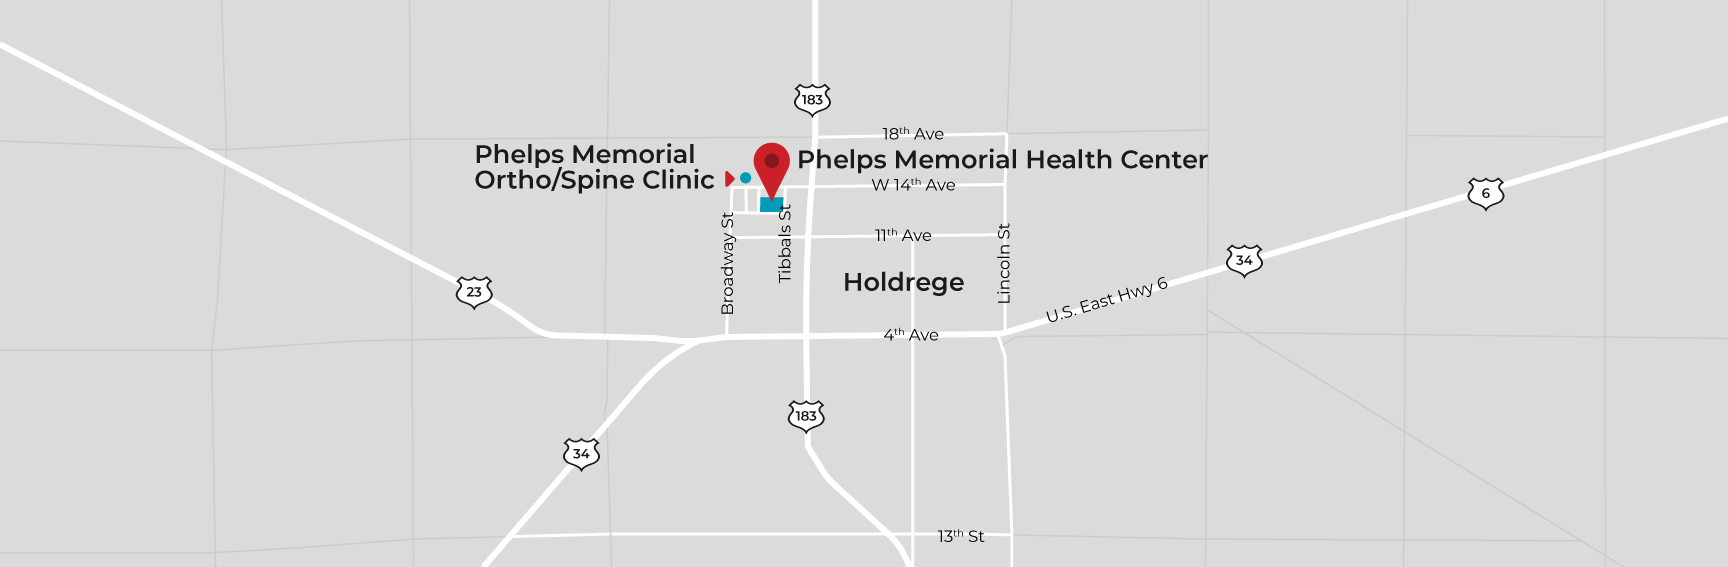 Map to Health Center